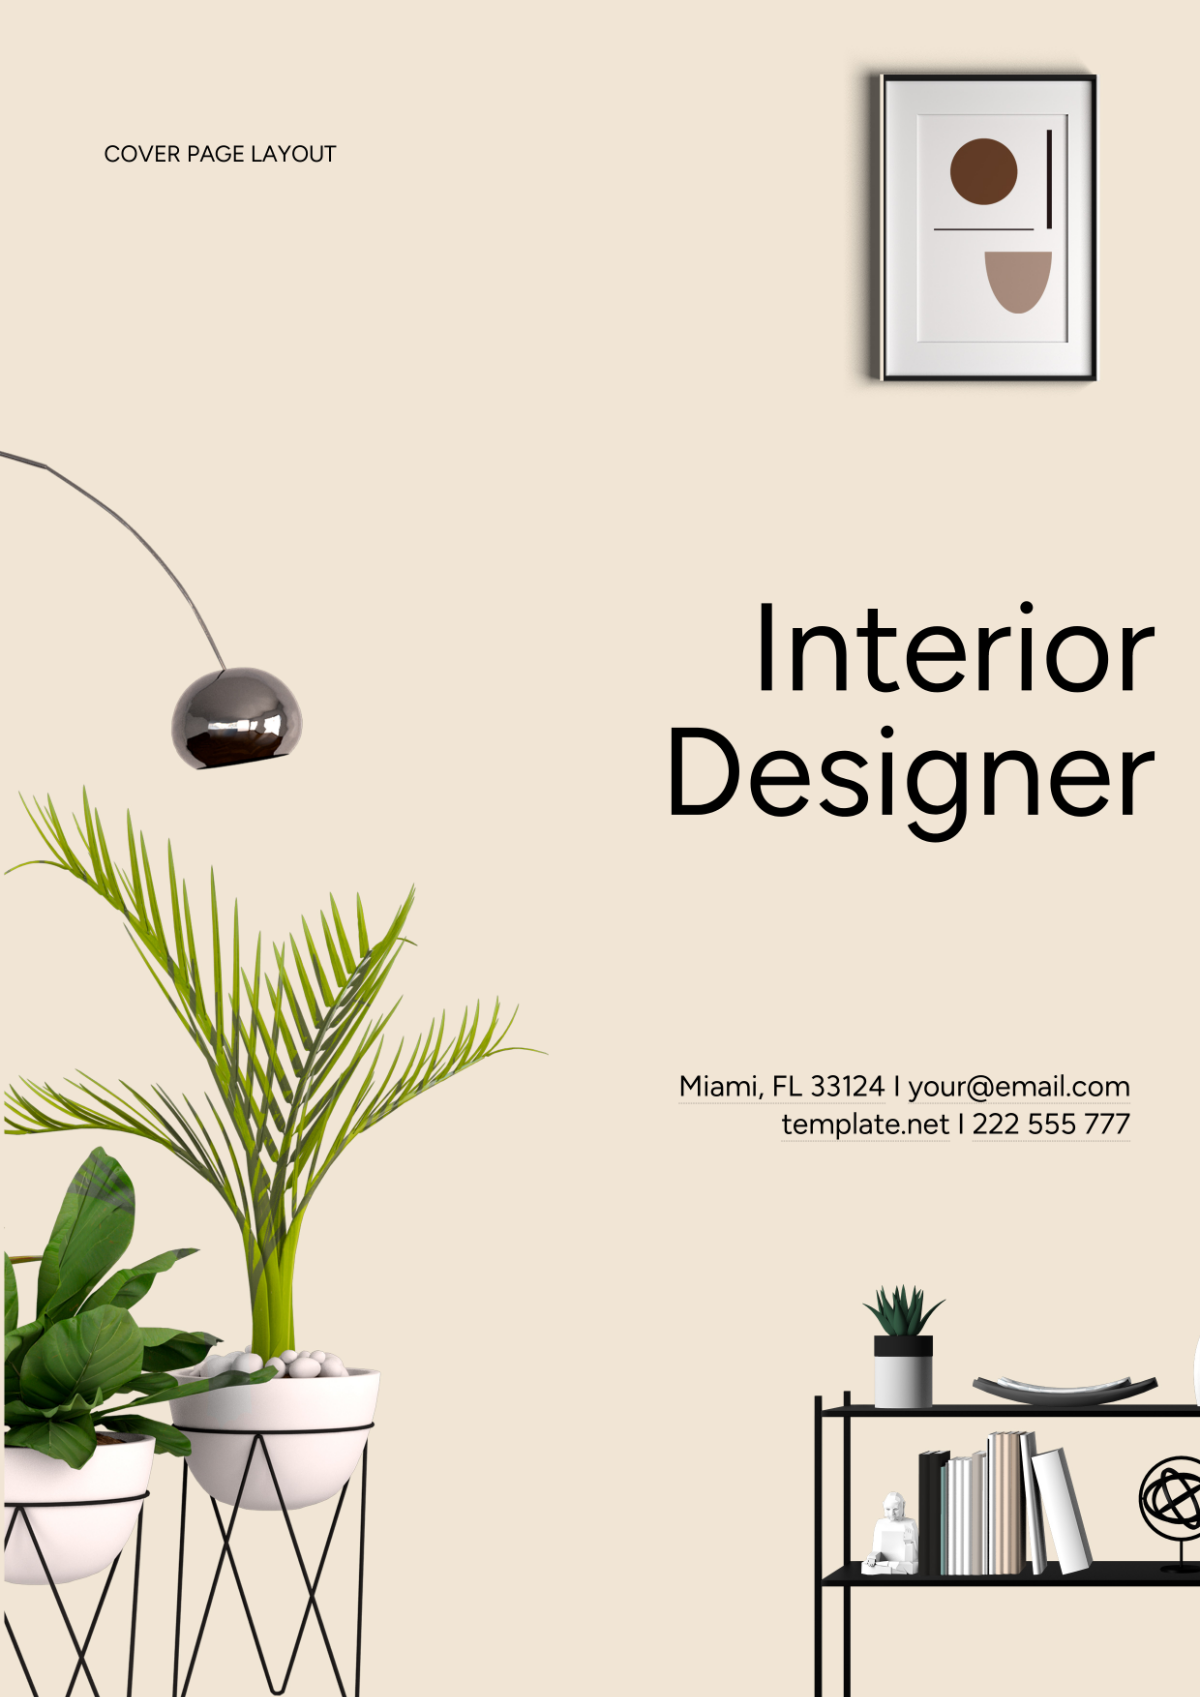 Interior Designer Cover Page Layout Template